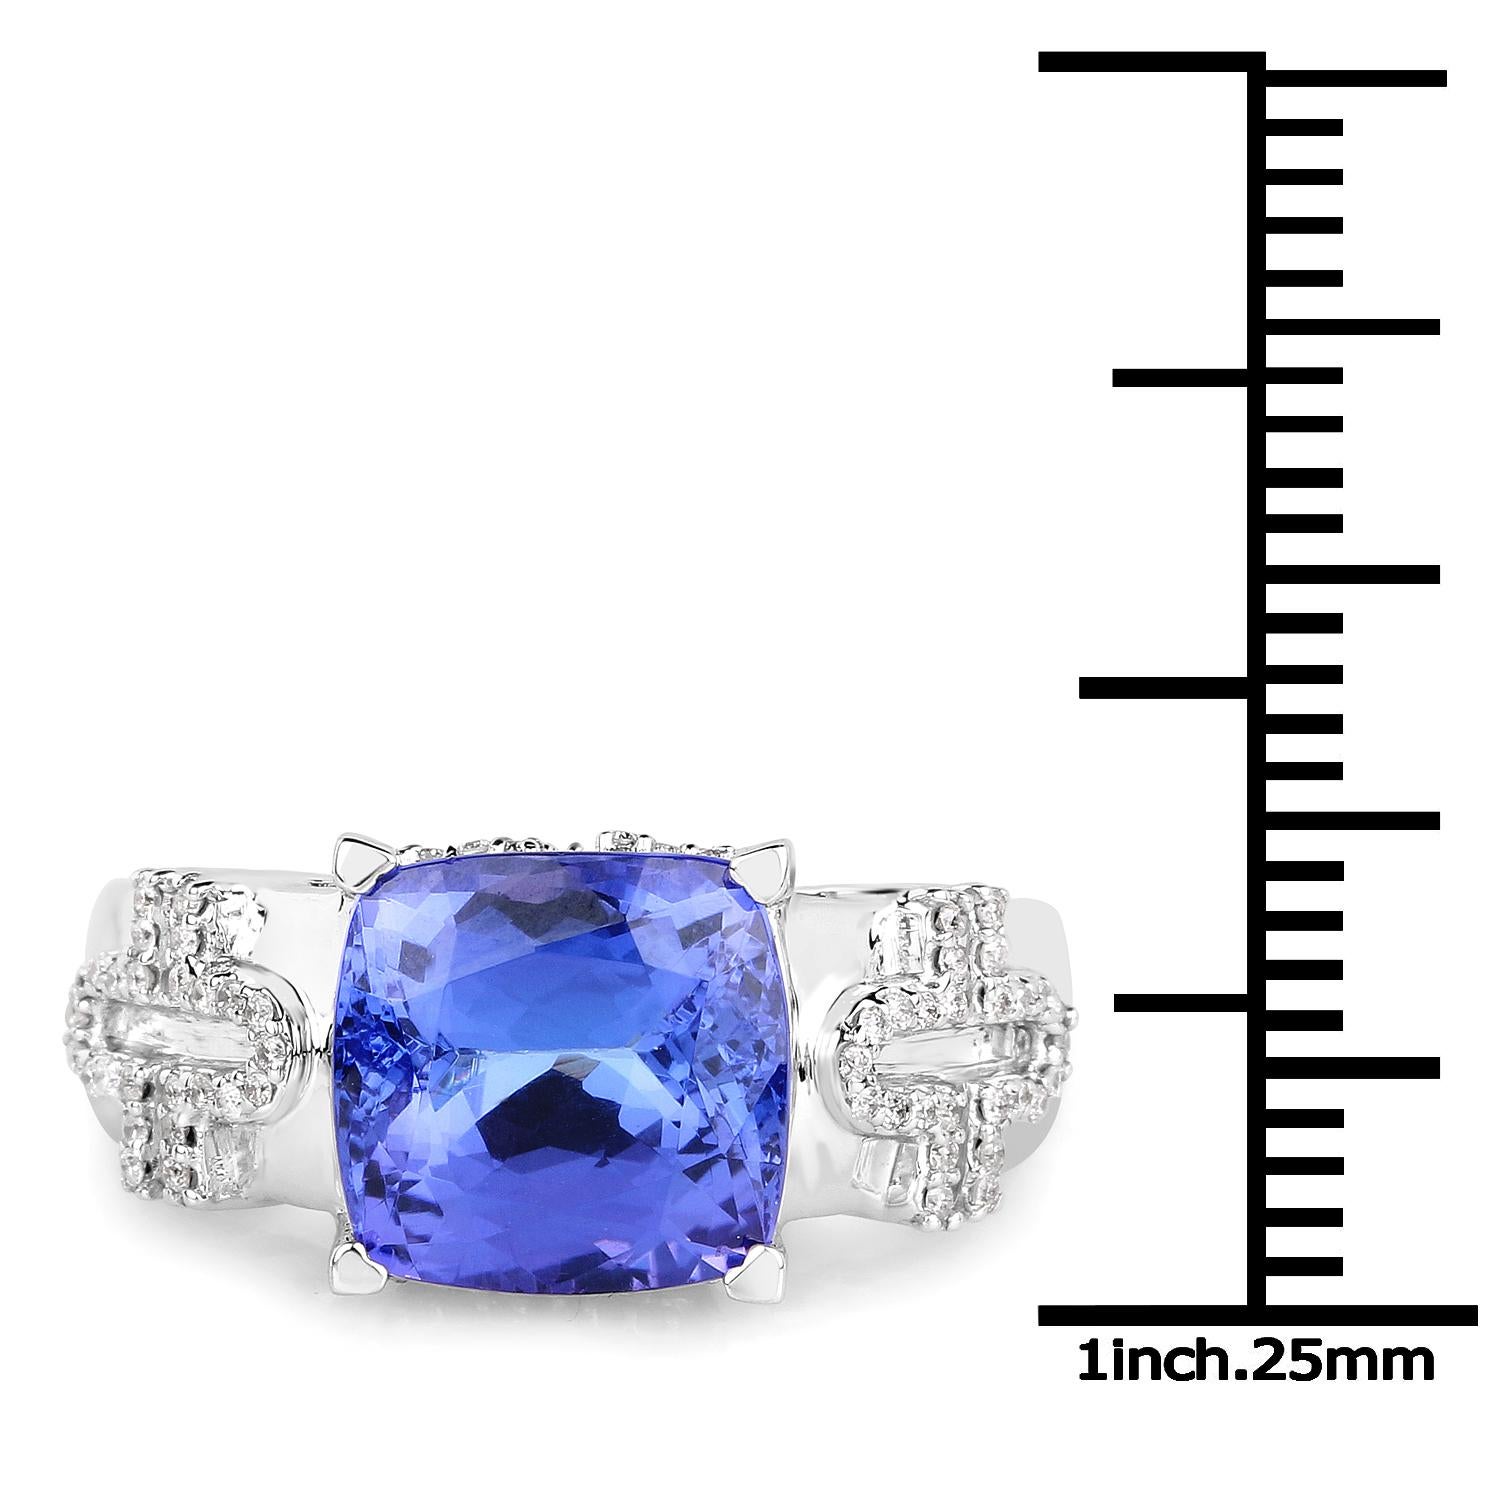 4.36 Carat Tanzanite and Diamond 14 Karat White Gold Cocktail Ring In New Condition For Sale In Great Neck, NY